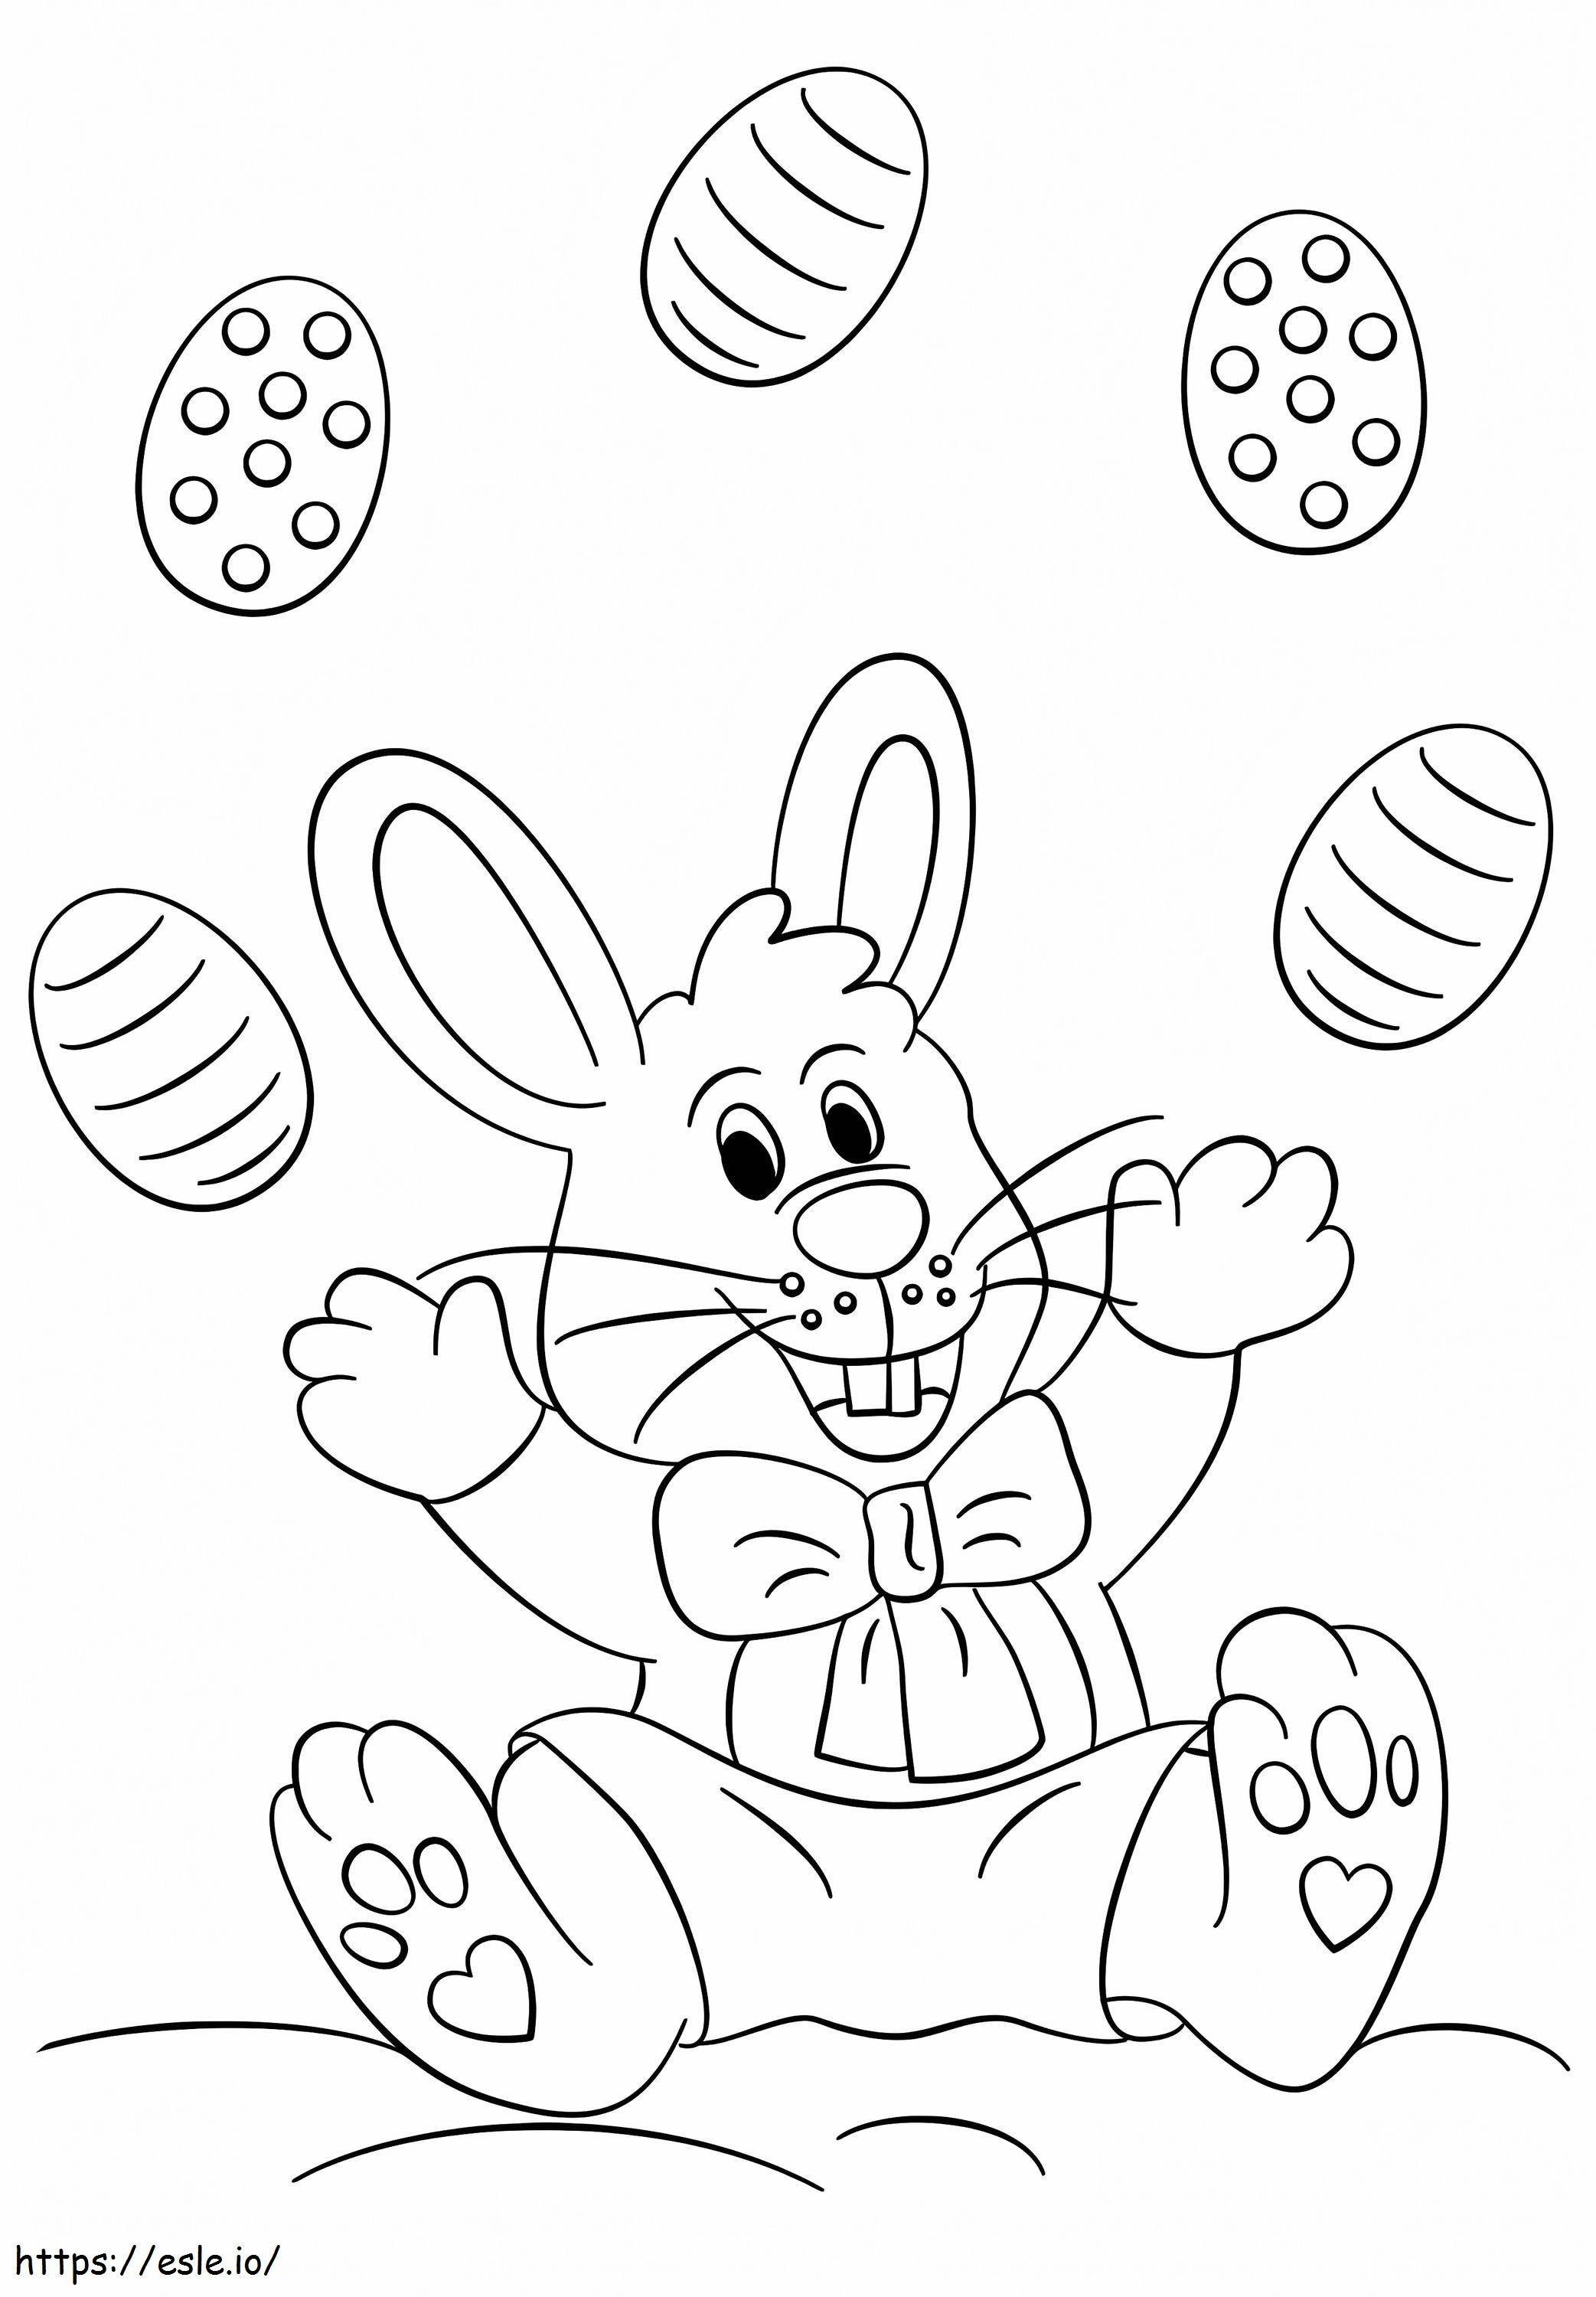 Easter Rabbit Playing With Egg coloring page